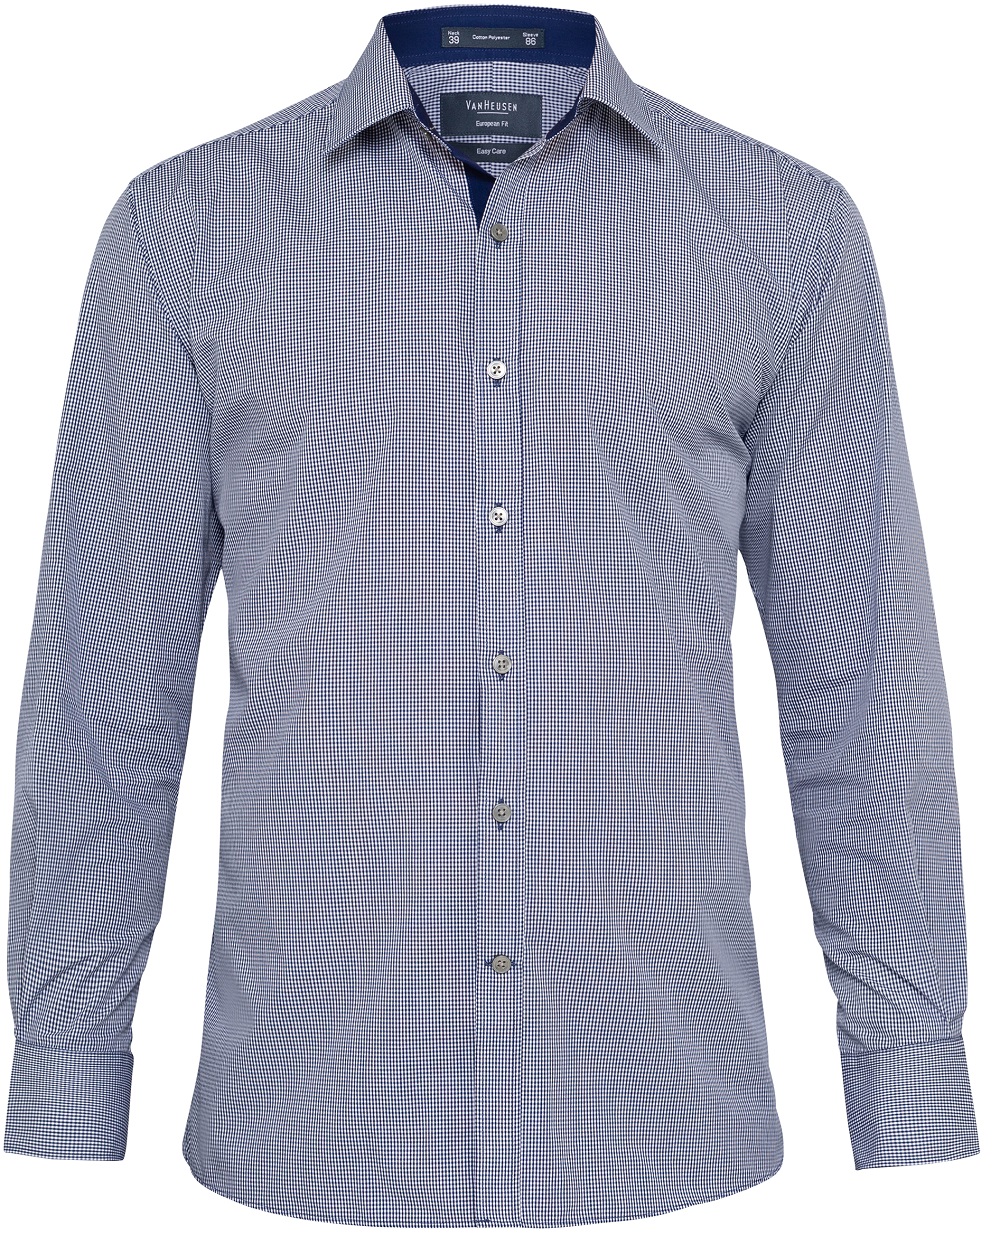 Van Heusen Euro Tailored Fit Easy Care Check Shirt. Sizes 37cm to 52cm